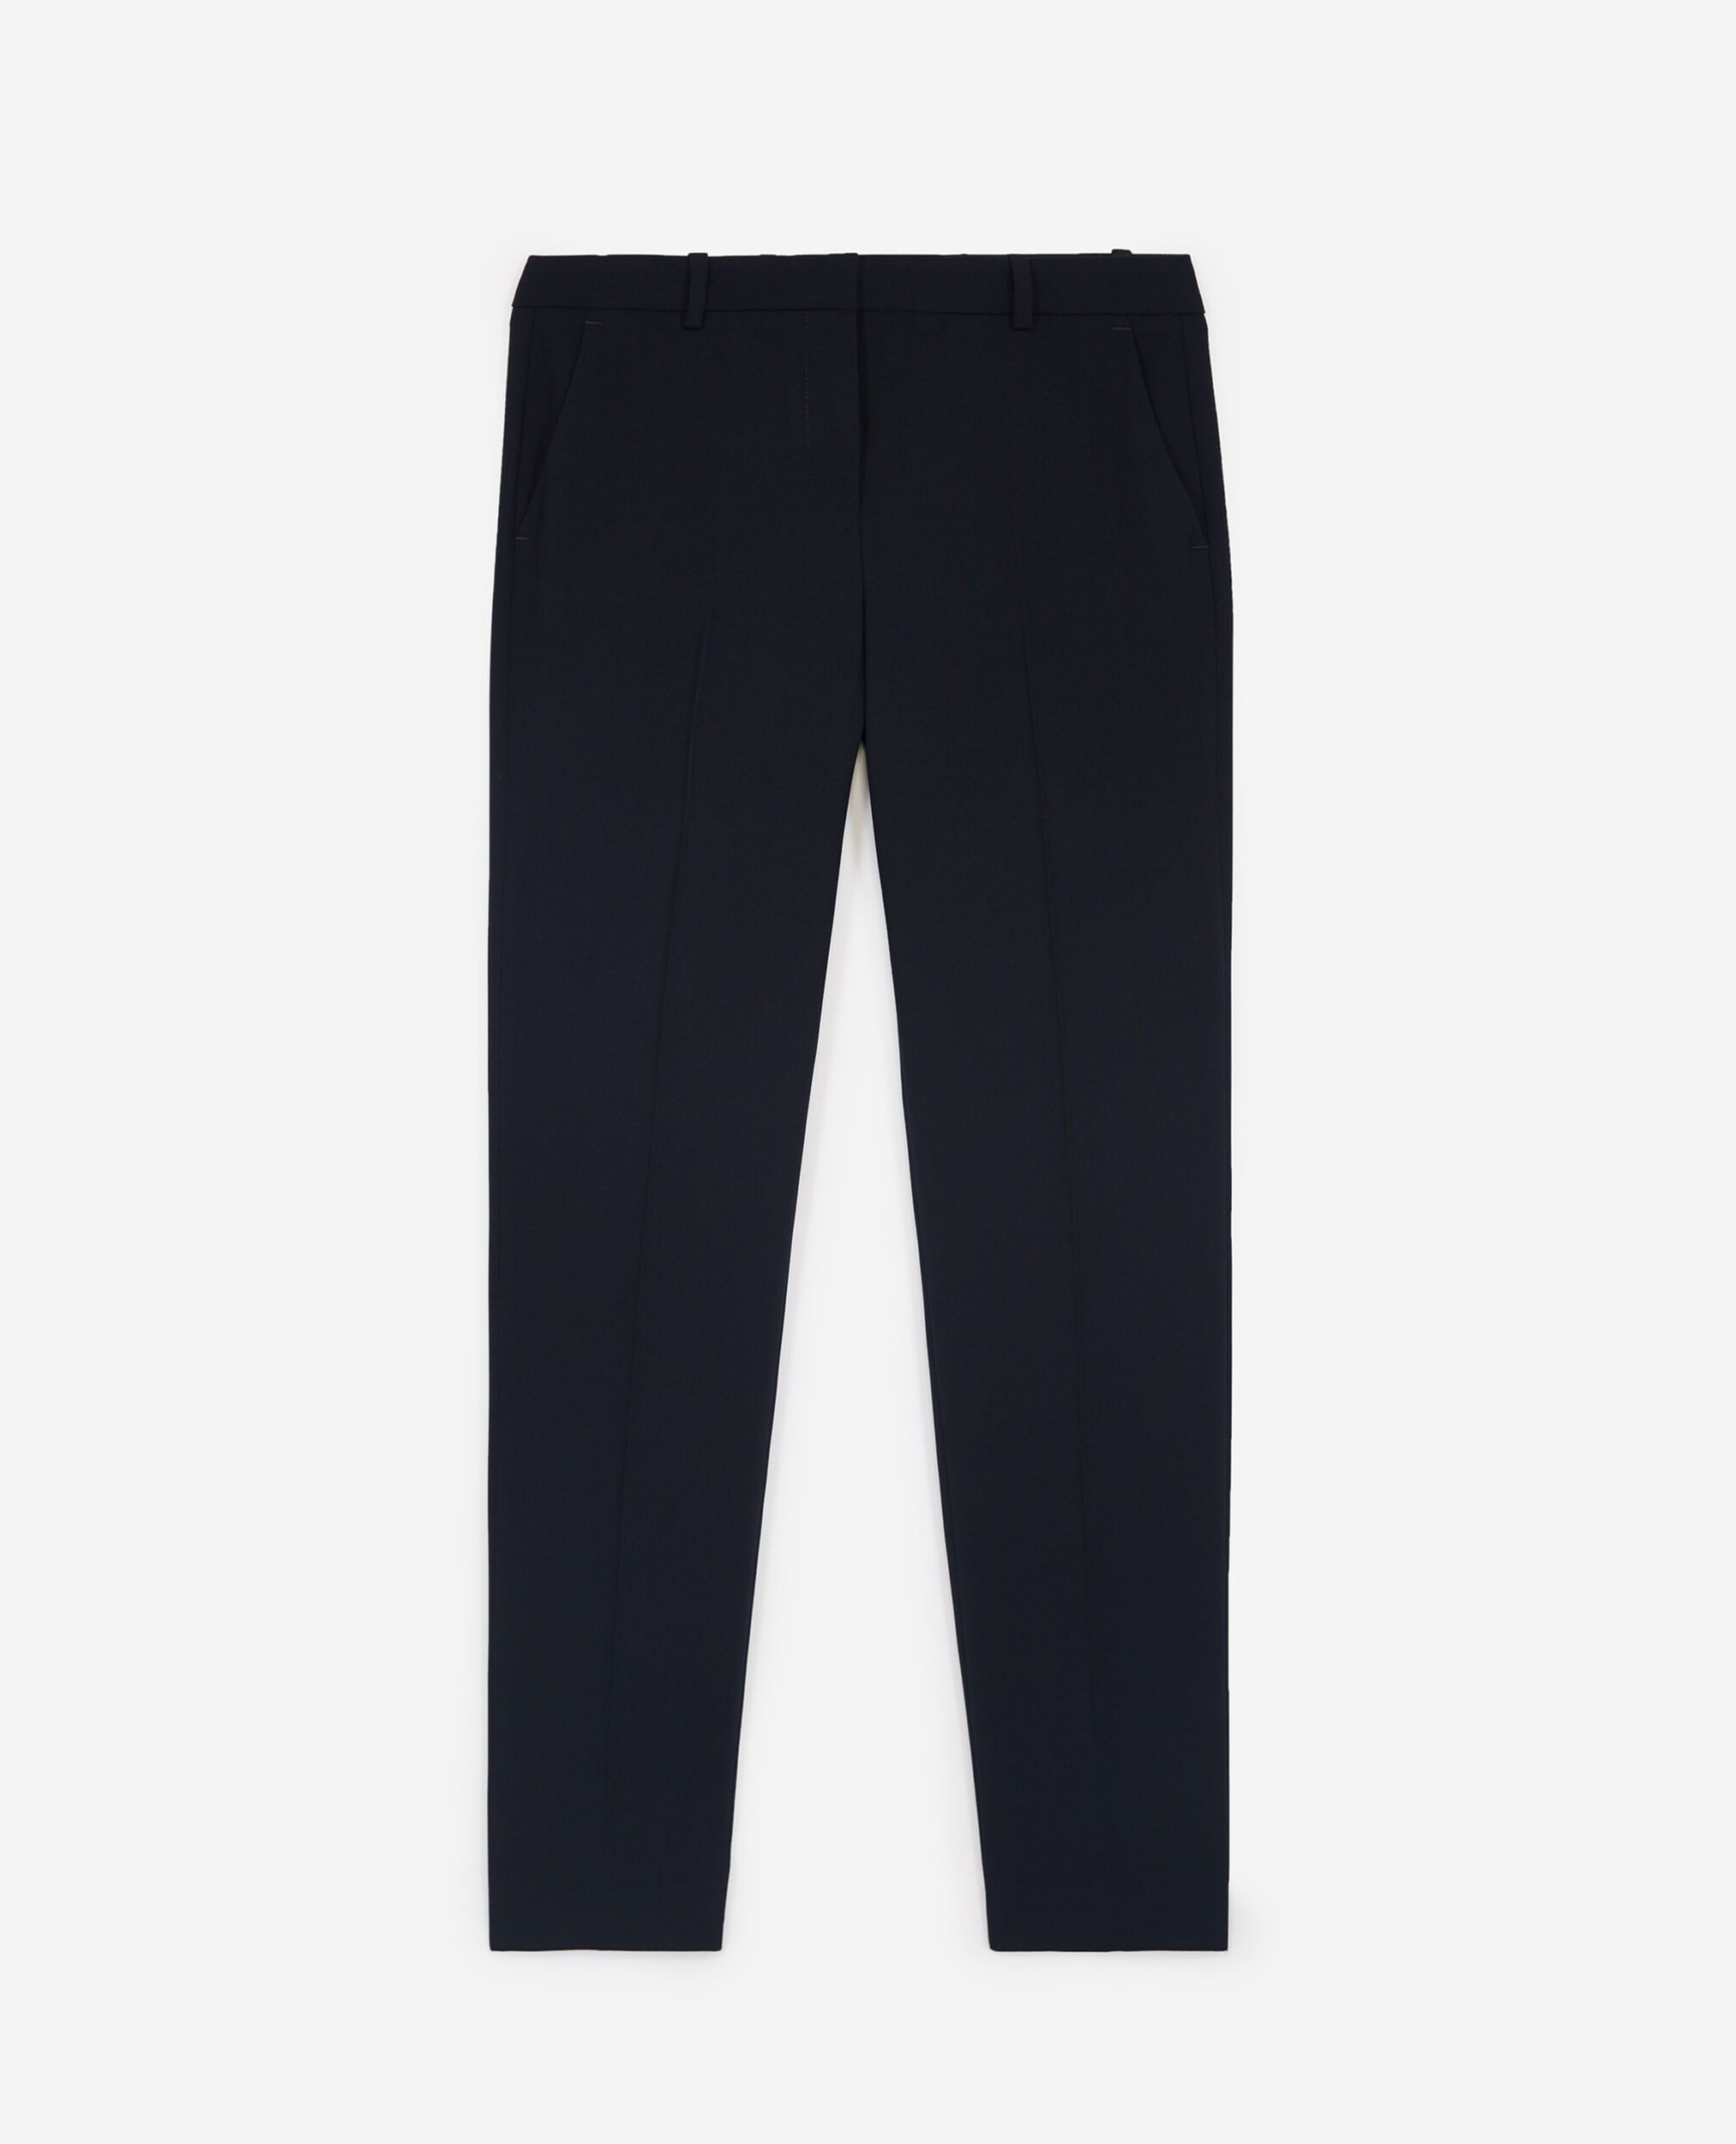 Flowing navy blue suit trousers, NAVY, hi-res image number null